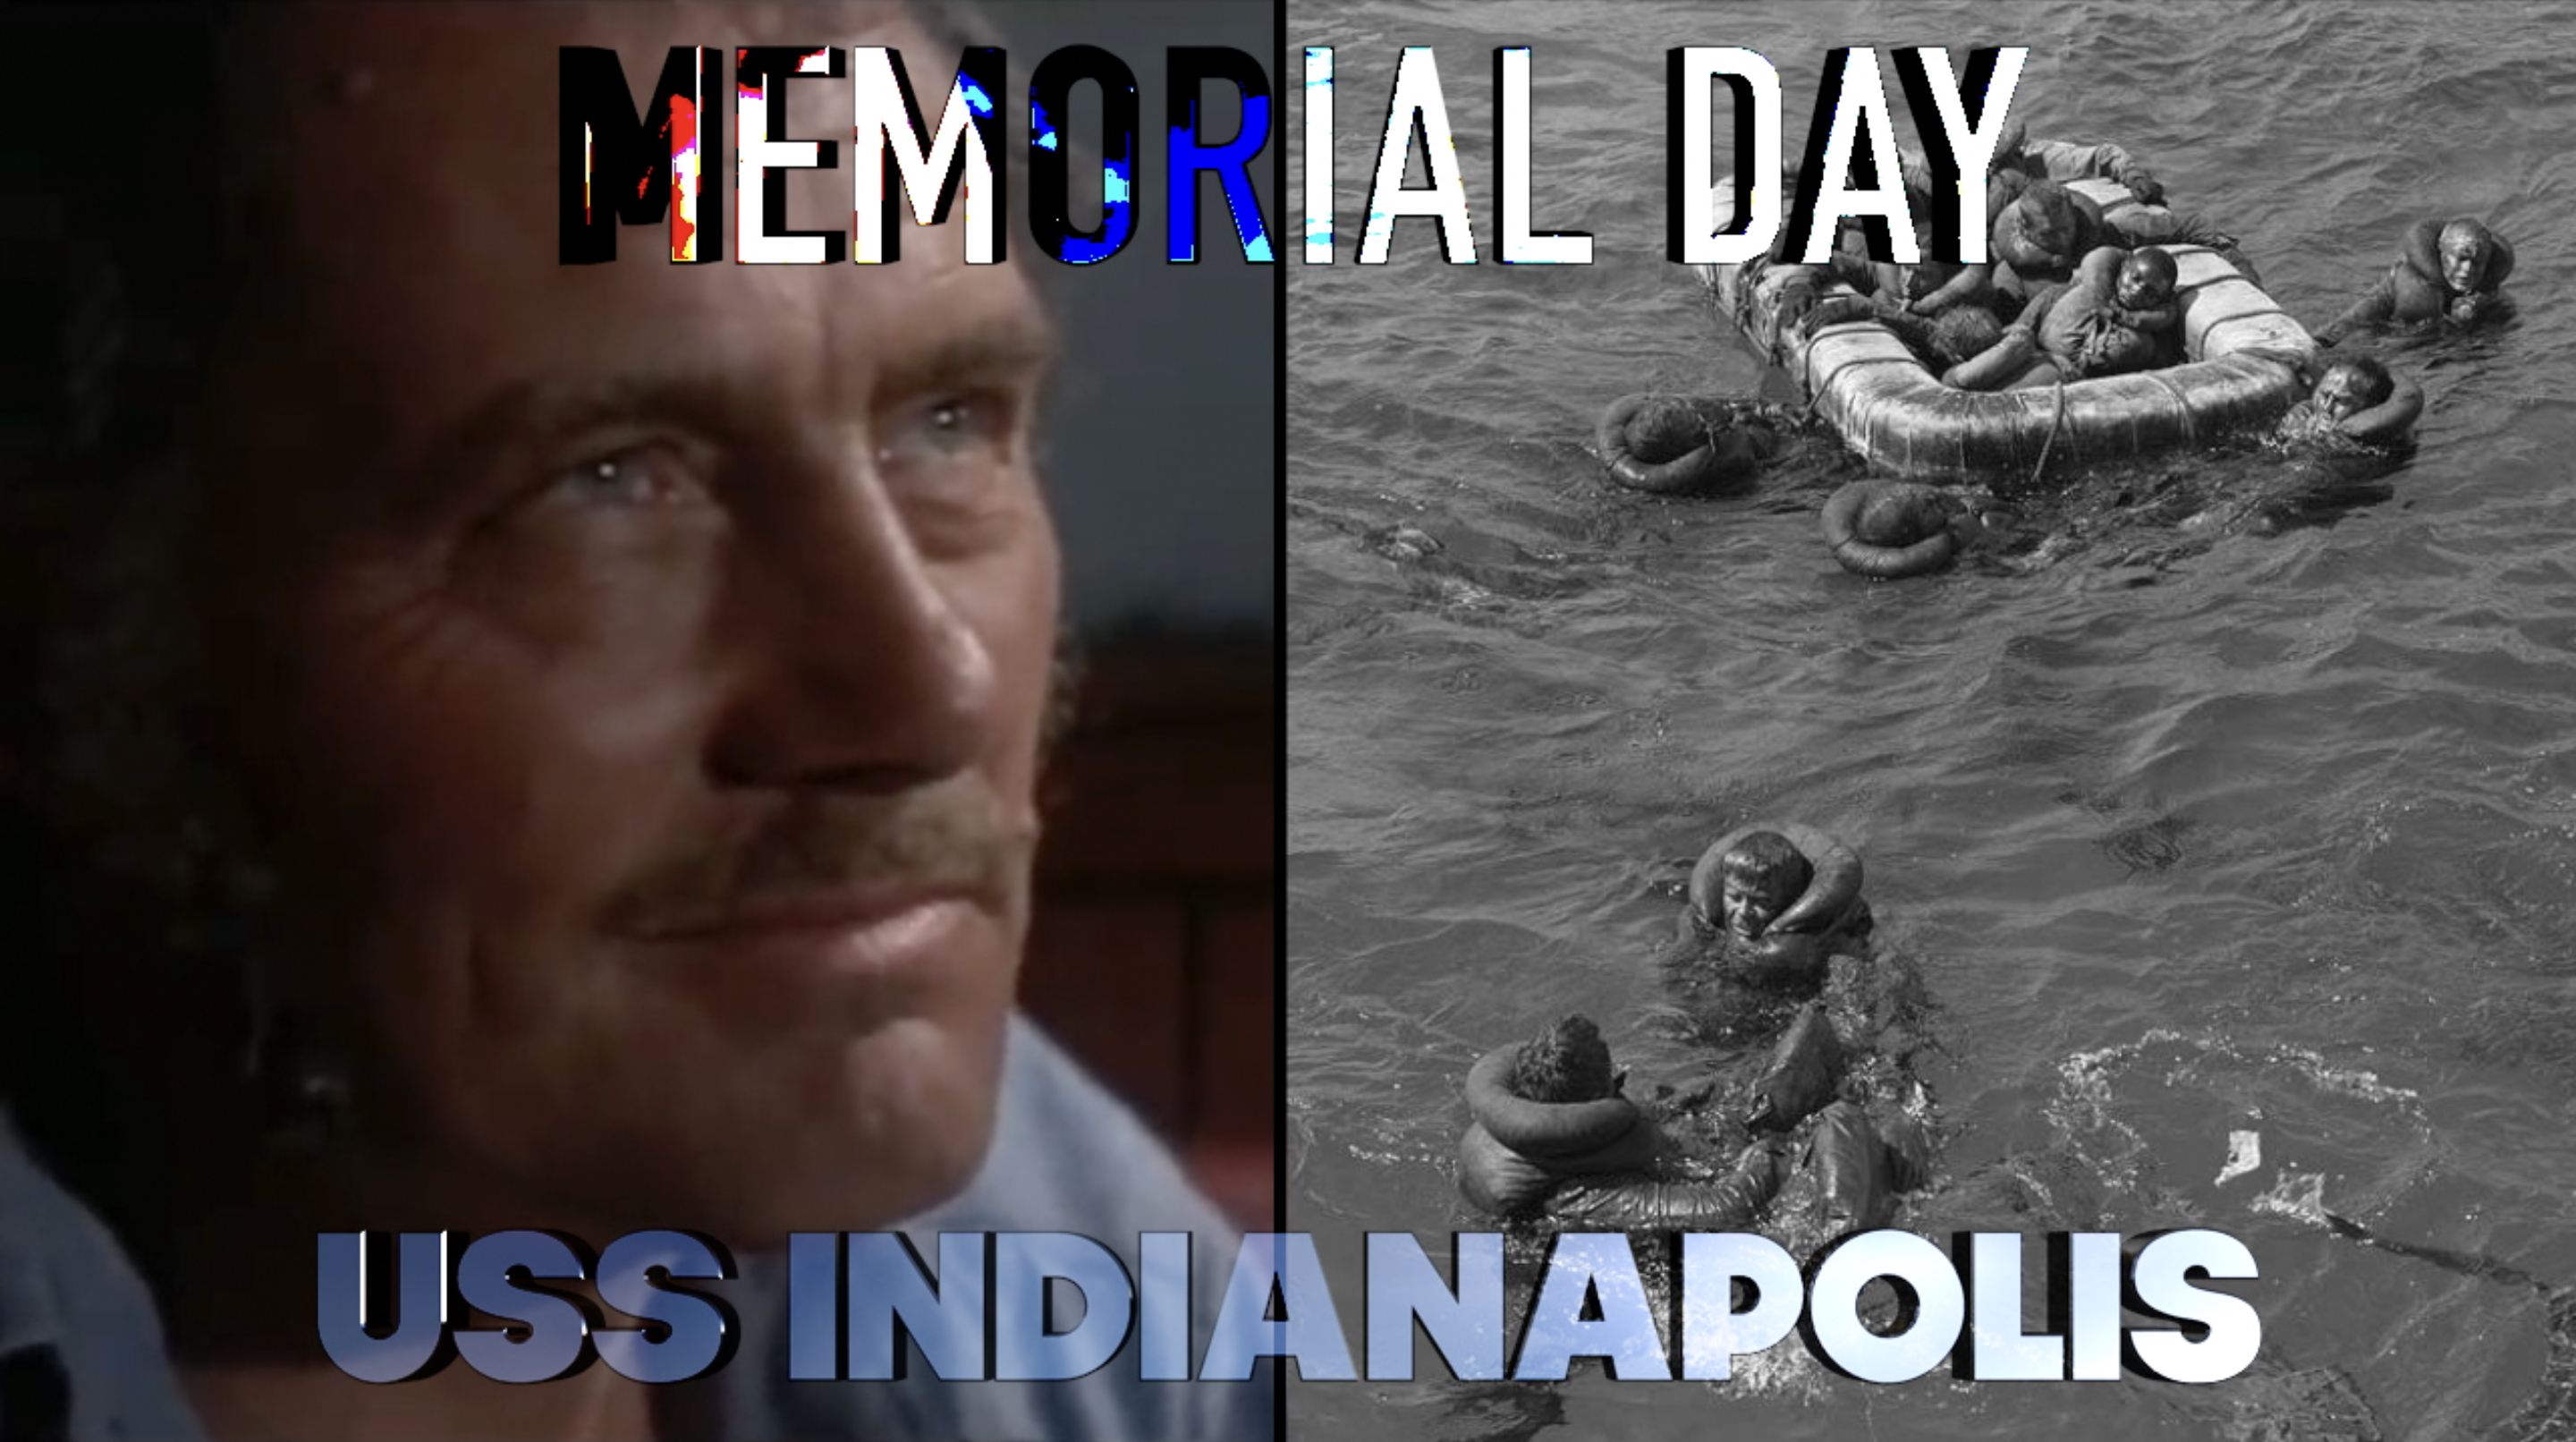 Remembering the Worst Naval Disaster In American History (The USS Indianapolis)—A Story Featured in the Movie 